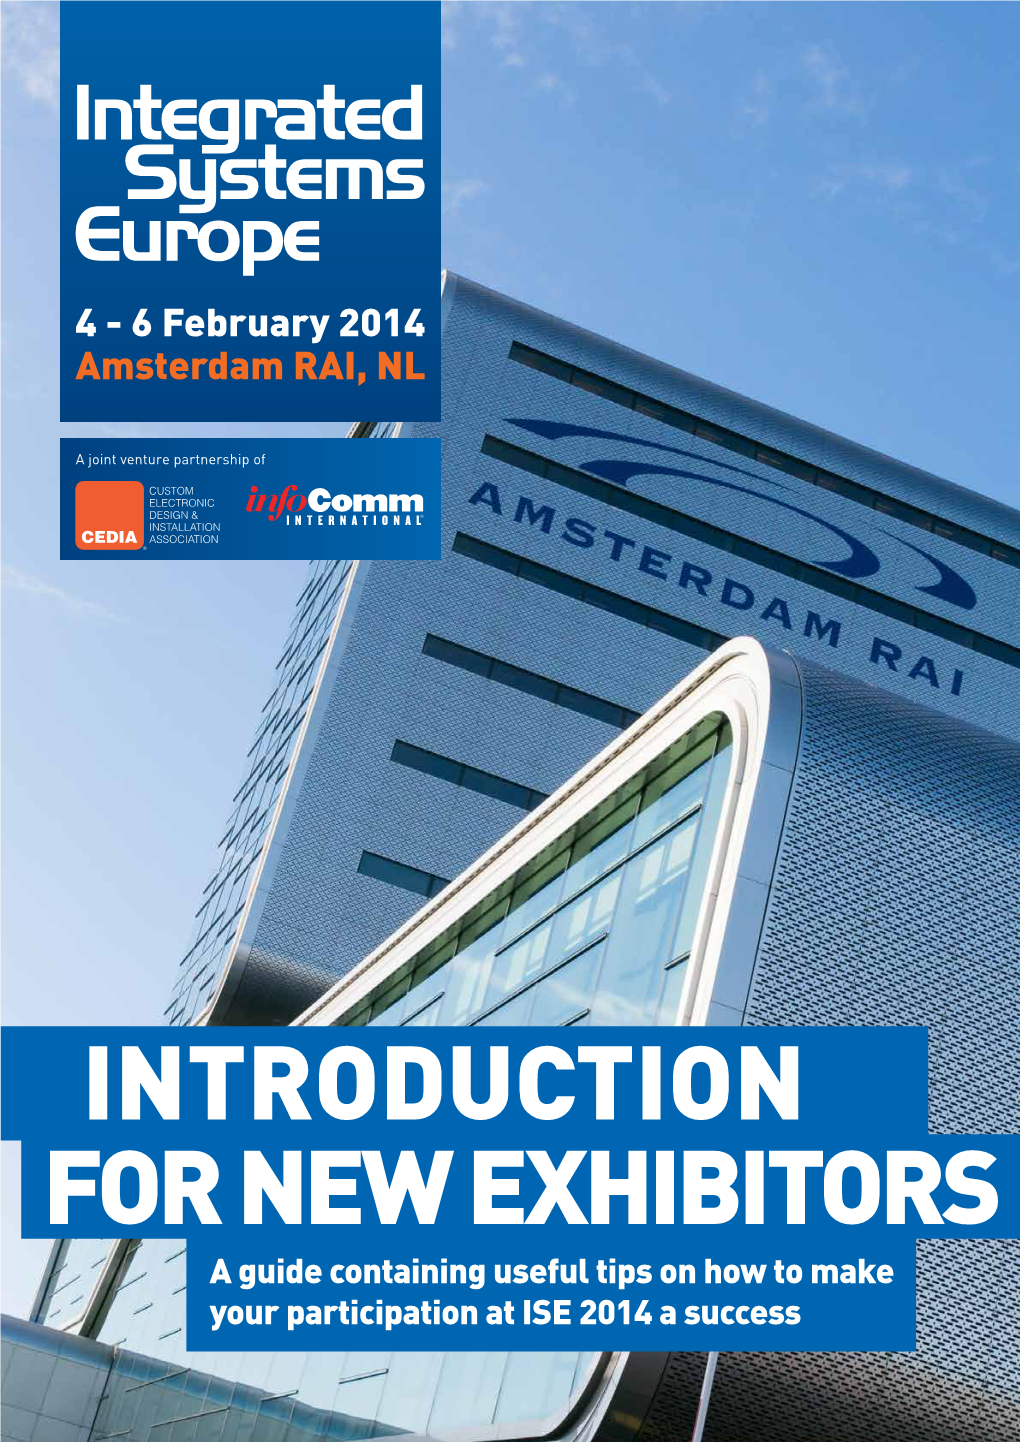 INTRODUCTION for NEW EXHIBITORS a Guide Containing Useful Tips on How to Make Your Participation at ISE 2014 a Success a Joint Venture Partnership Of